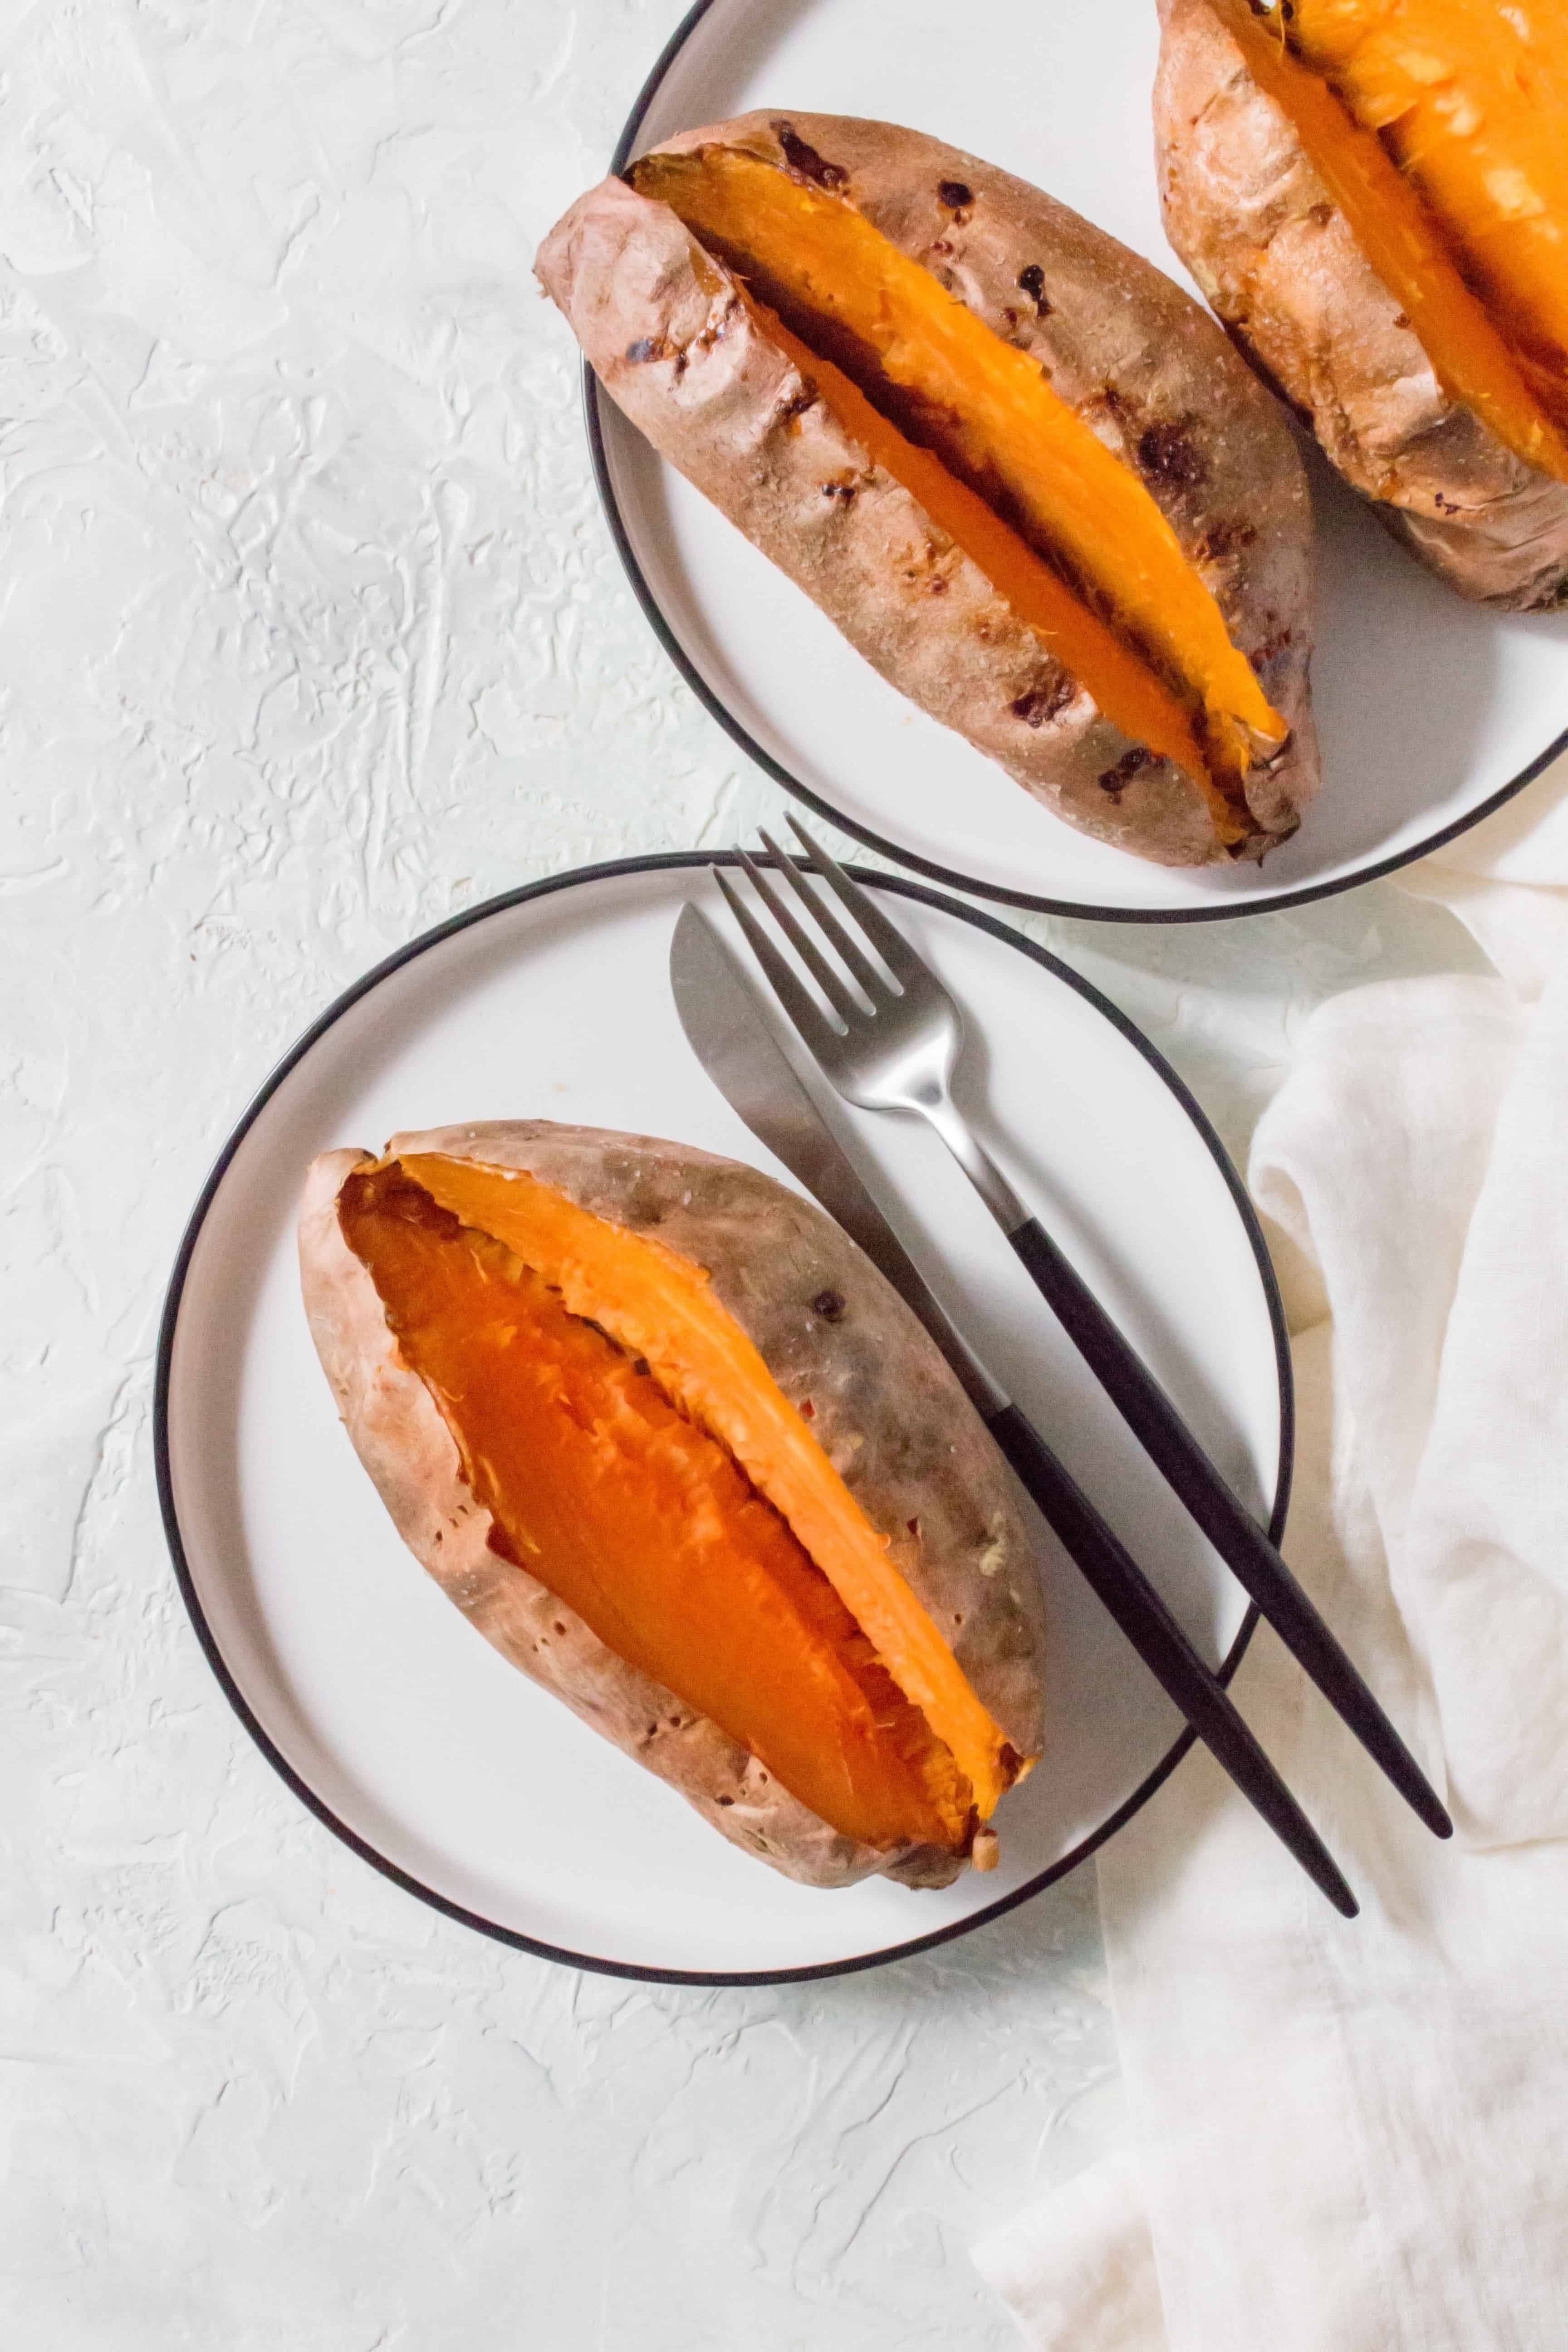 The perfect side dish for a holiday meal or any meal, this baked sweet potato recipe made in the air fryer will have you making flawless baked sweet potatoes every time!